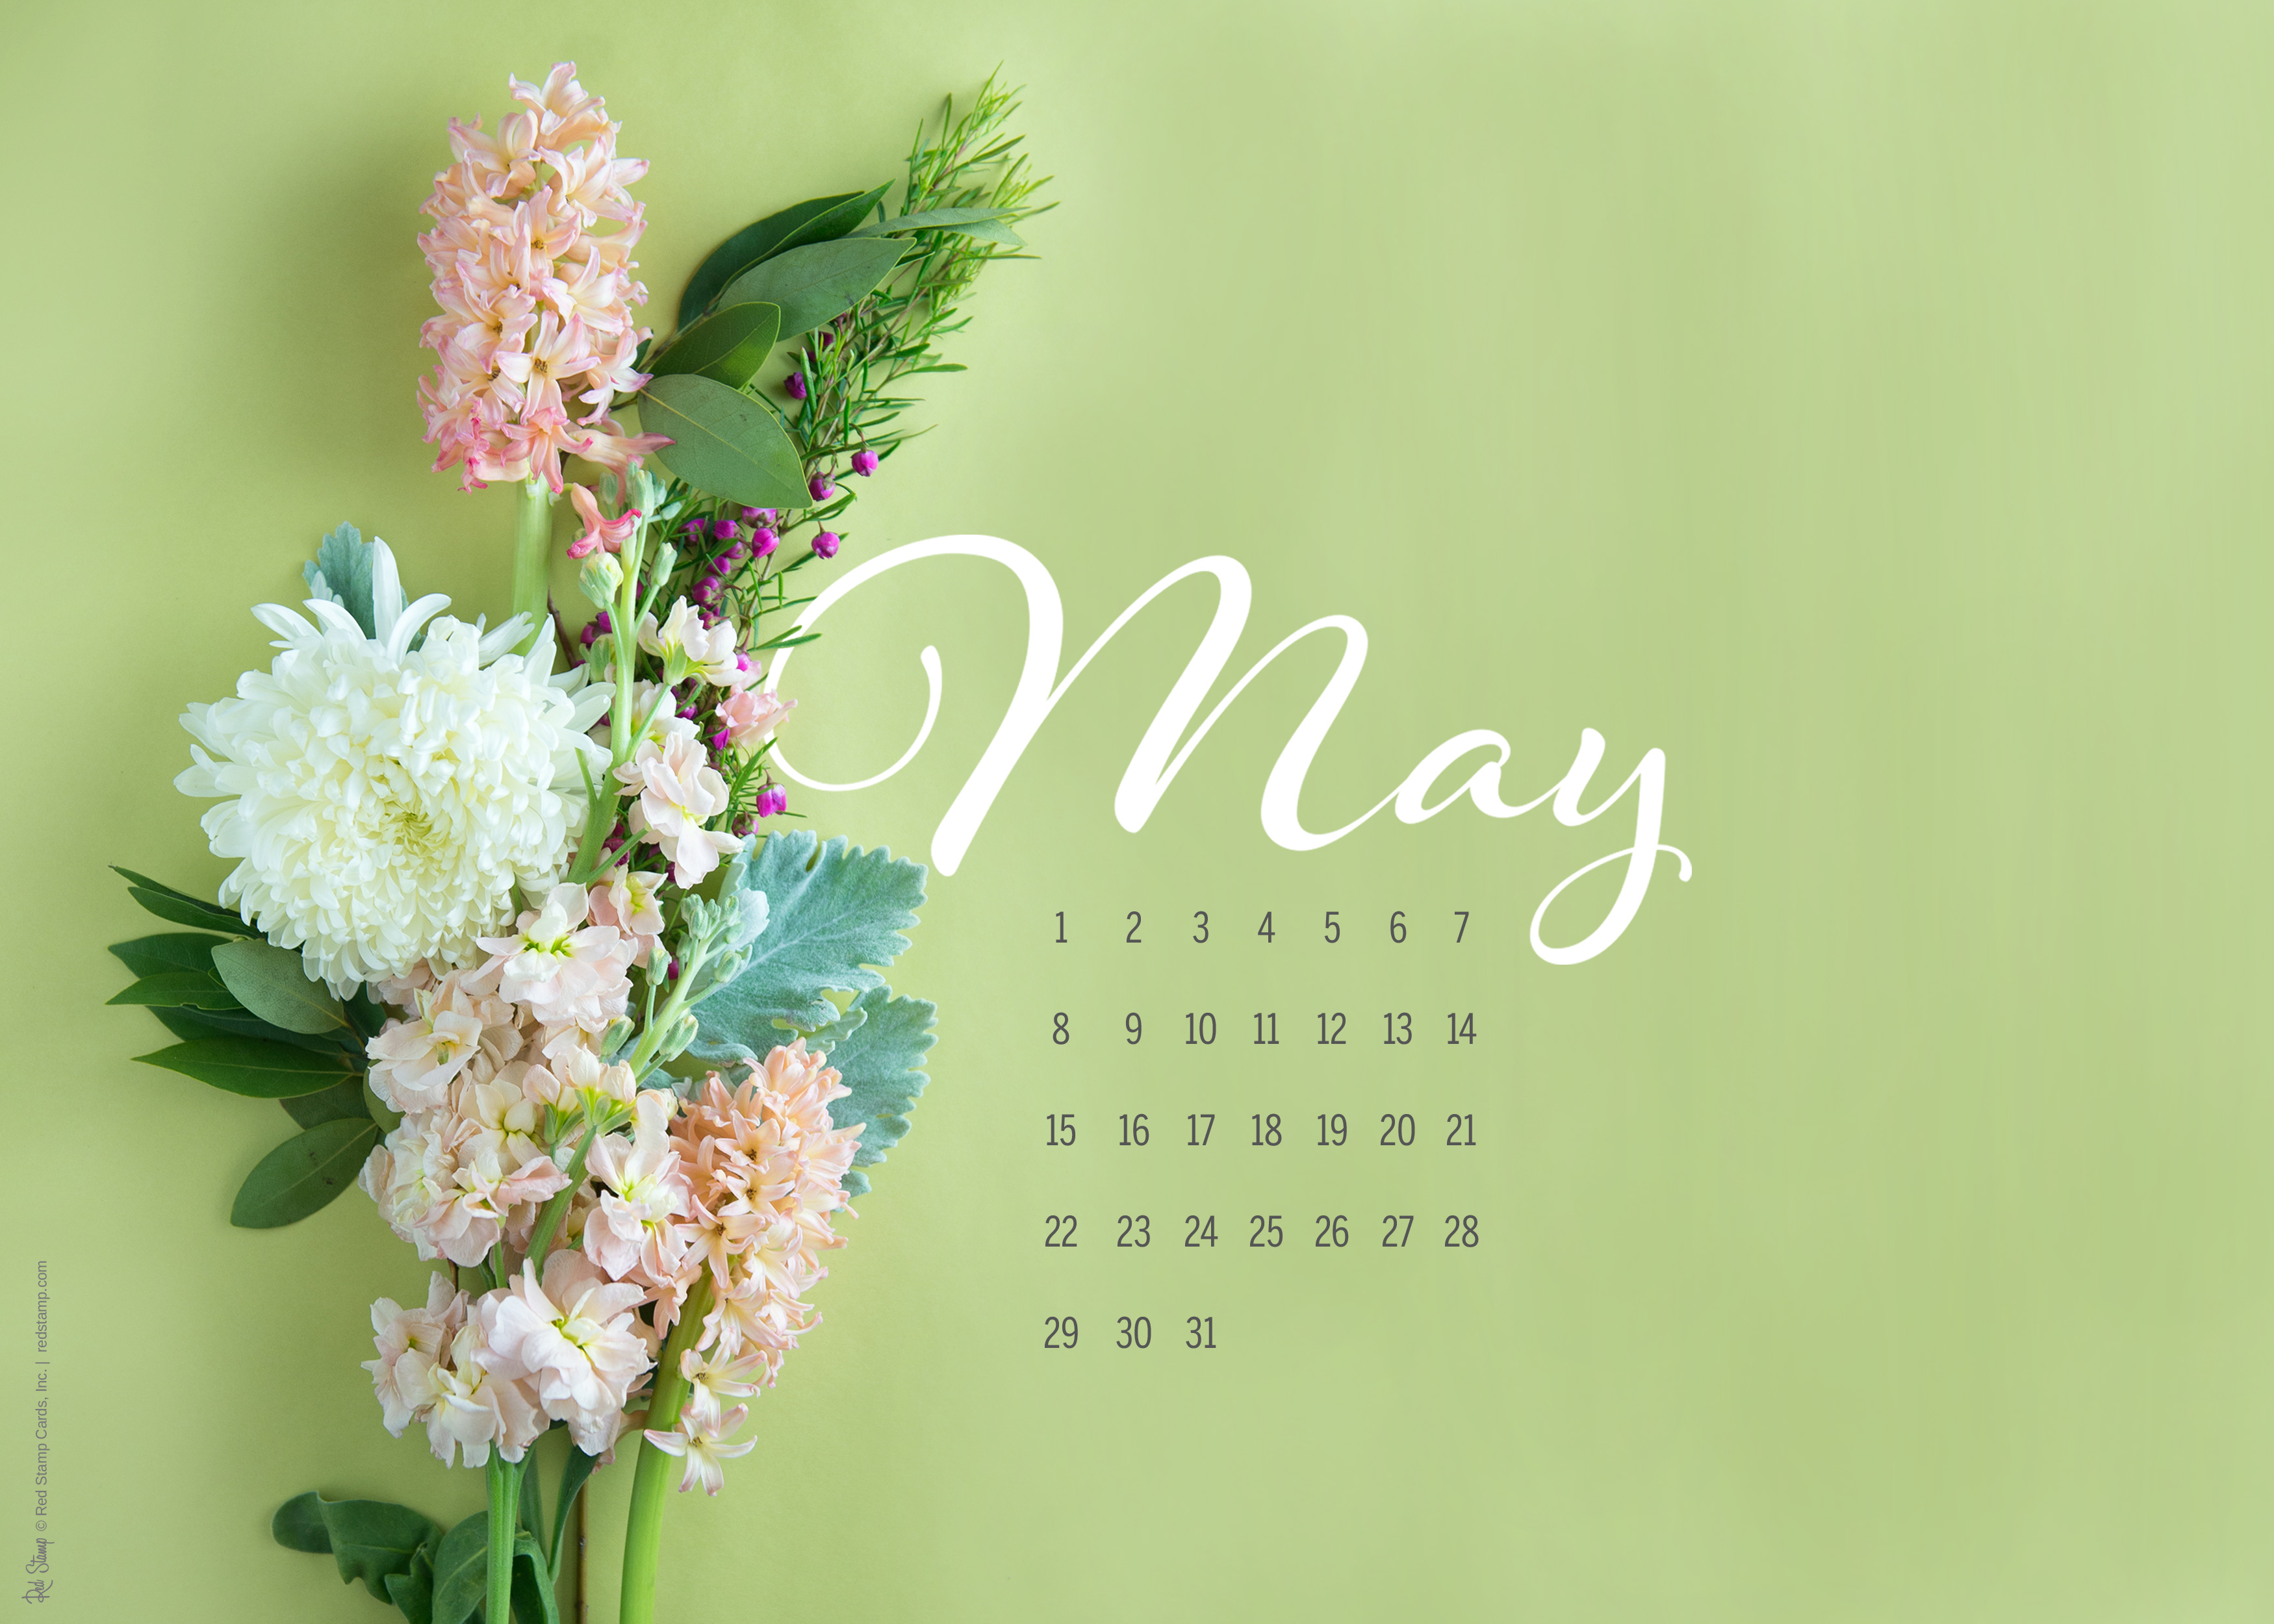 May 2016 Free Calendars and Wallpaper   Red Stamp